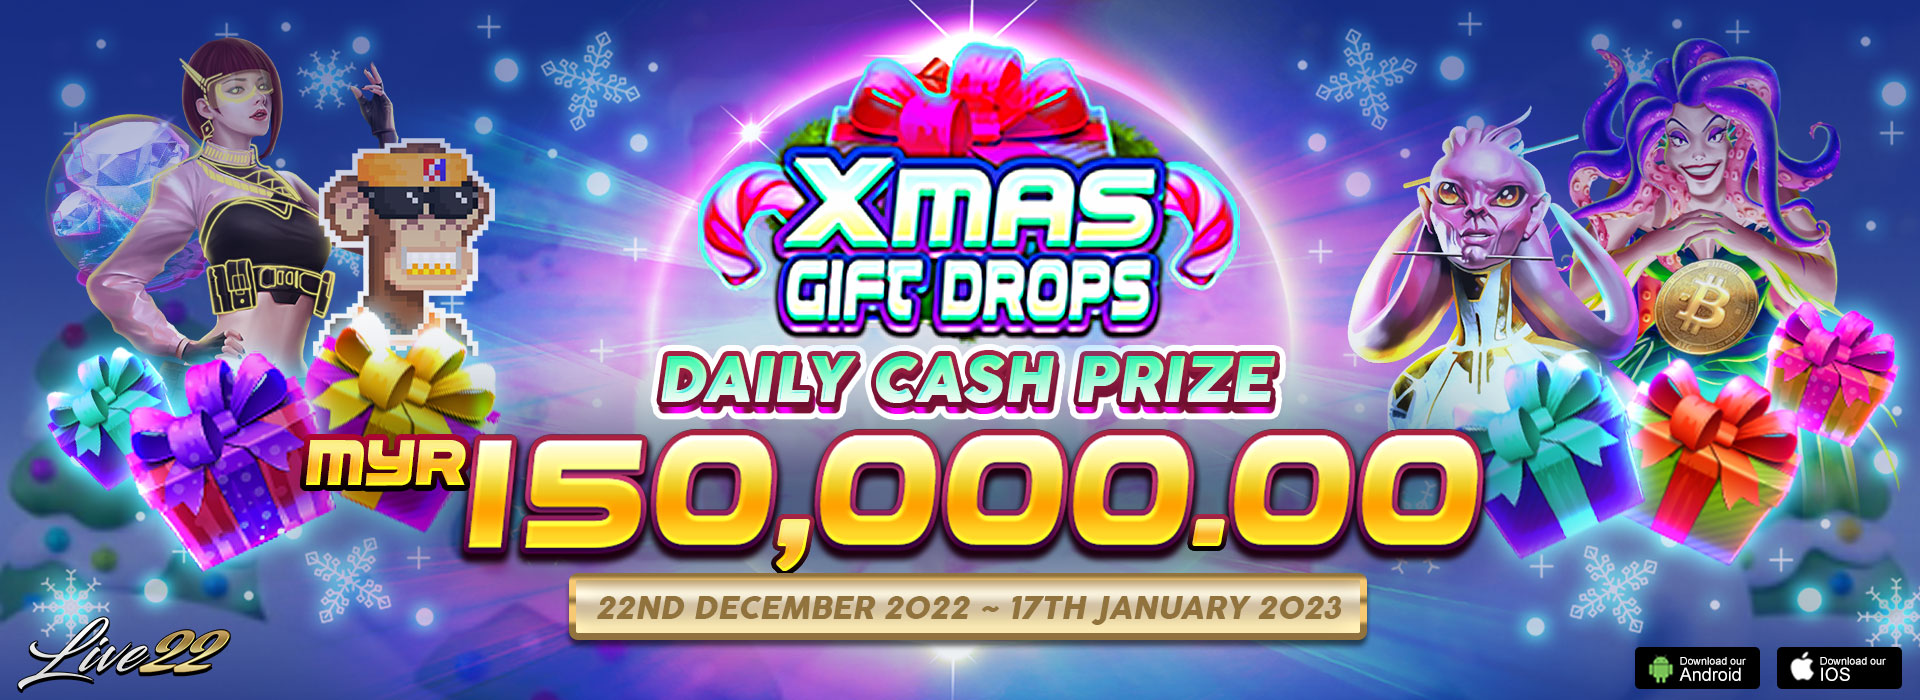 Xmas Gift Drops Daily Cash Prize up to MYR150,000.00